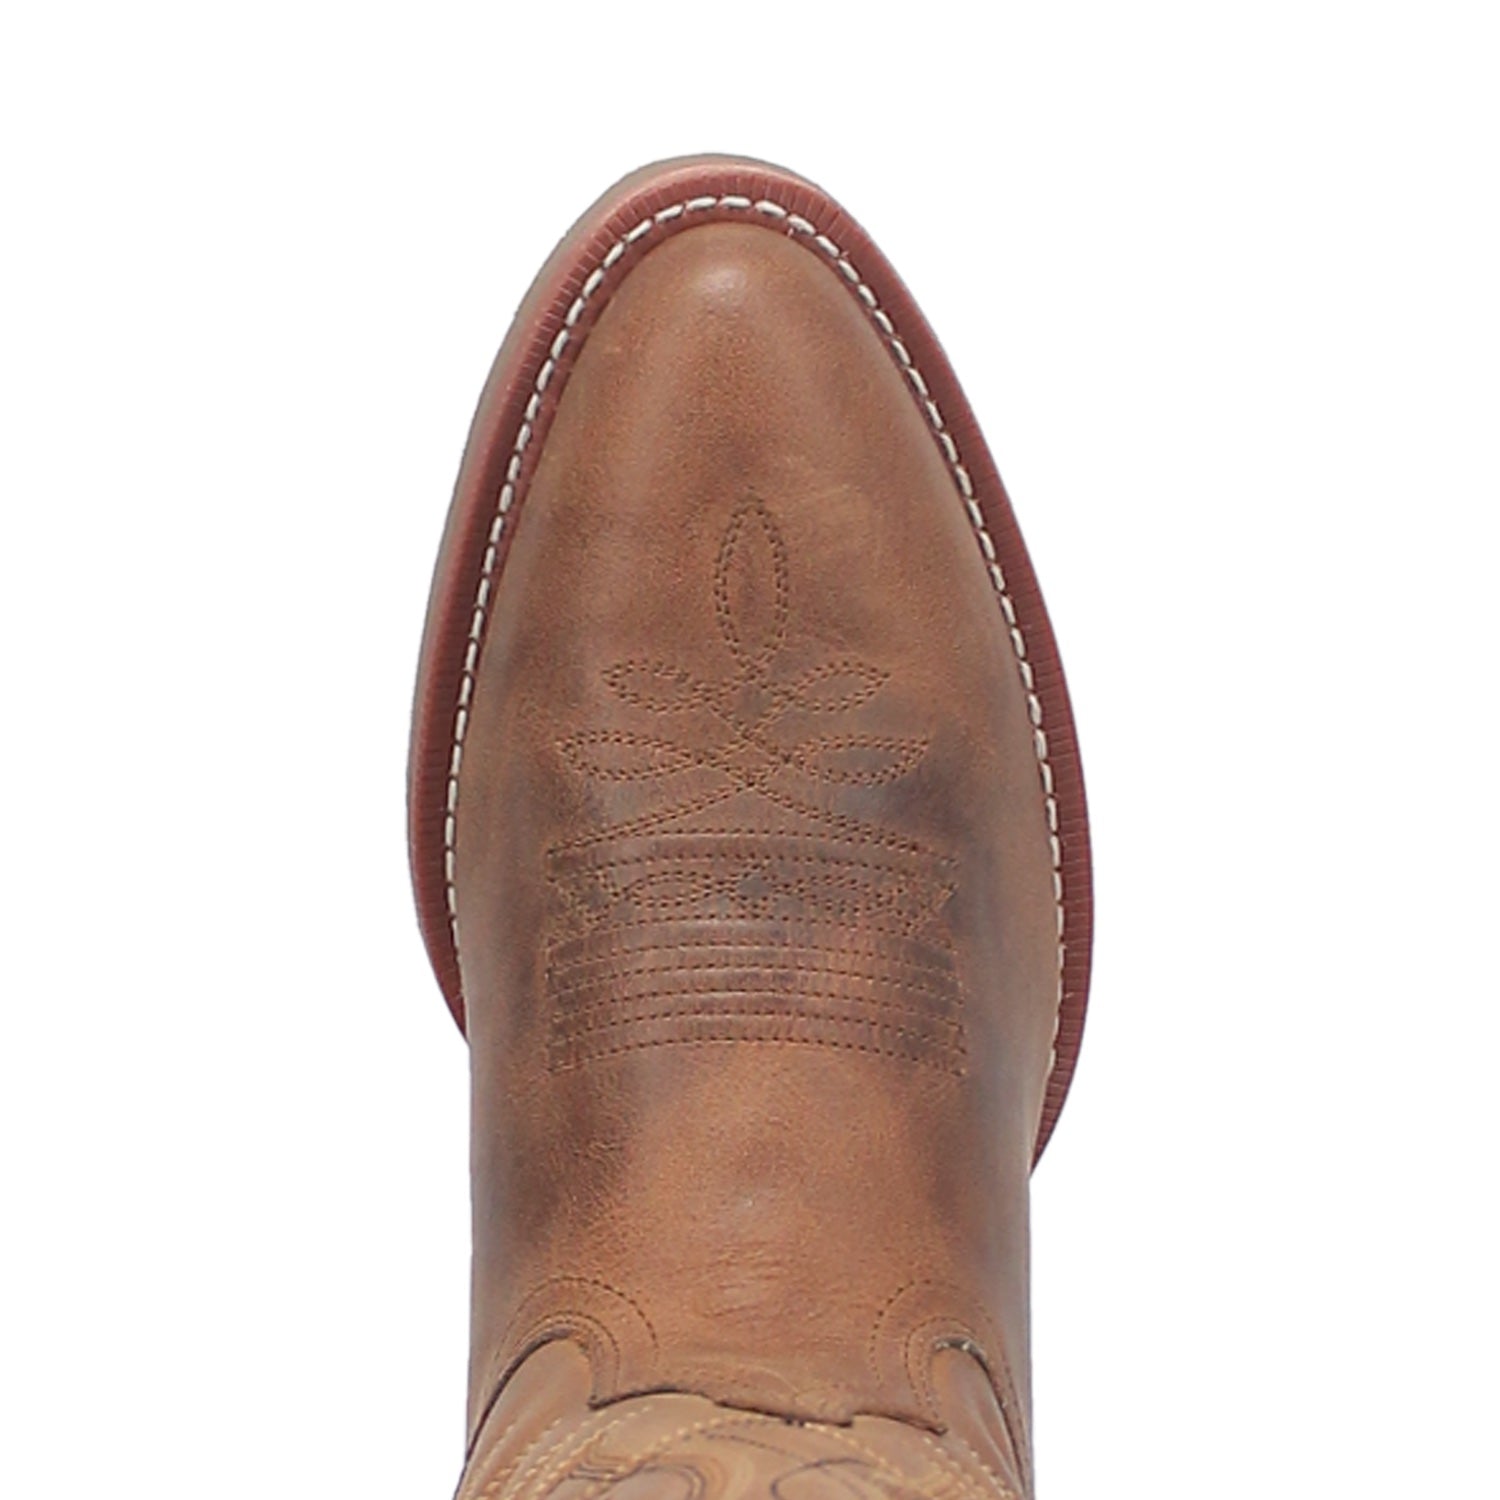 WELLER LEATHER BOOT Image